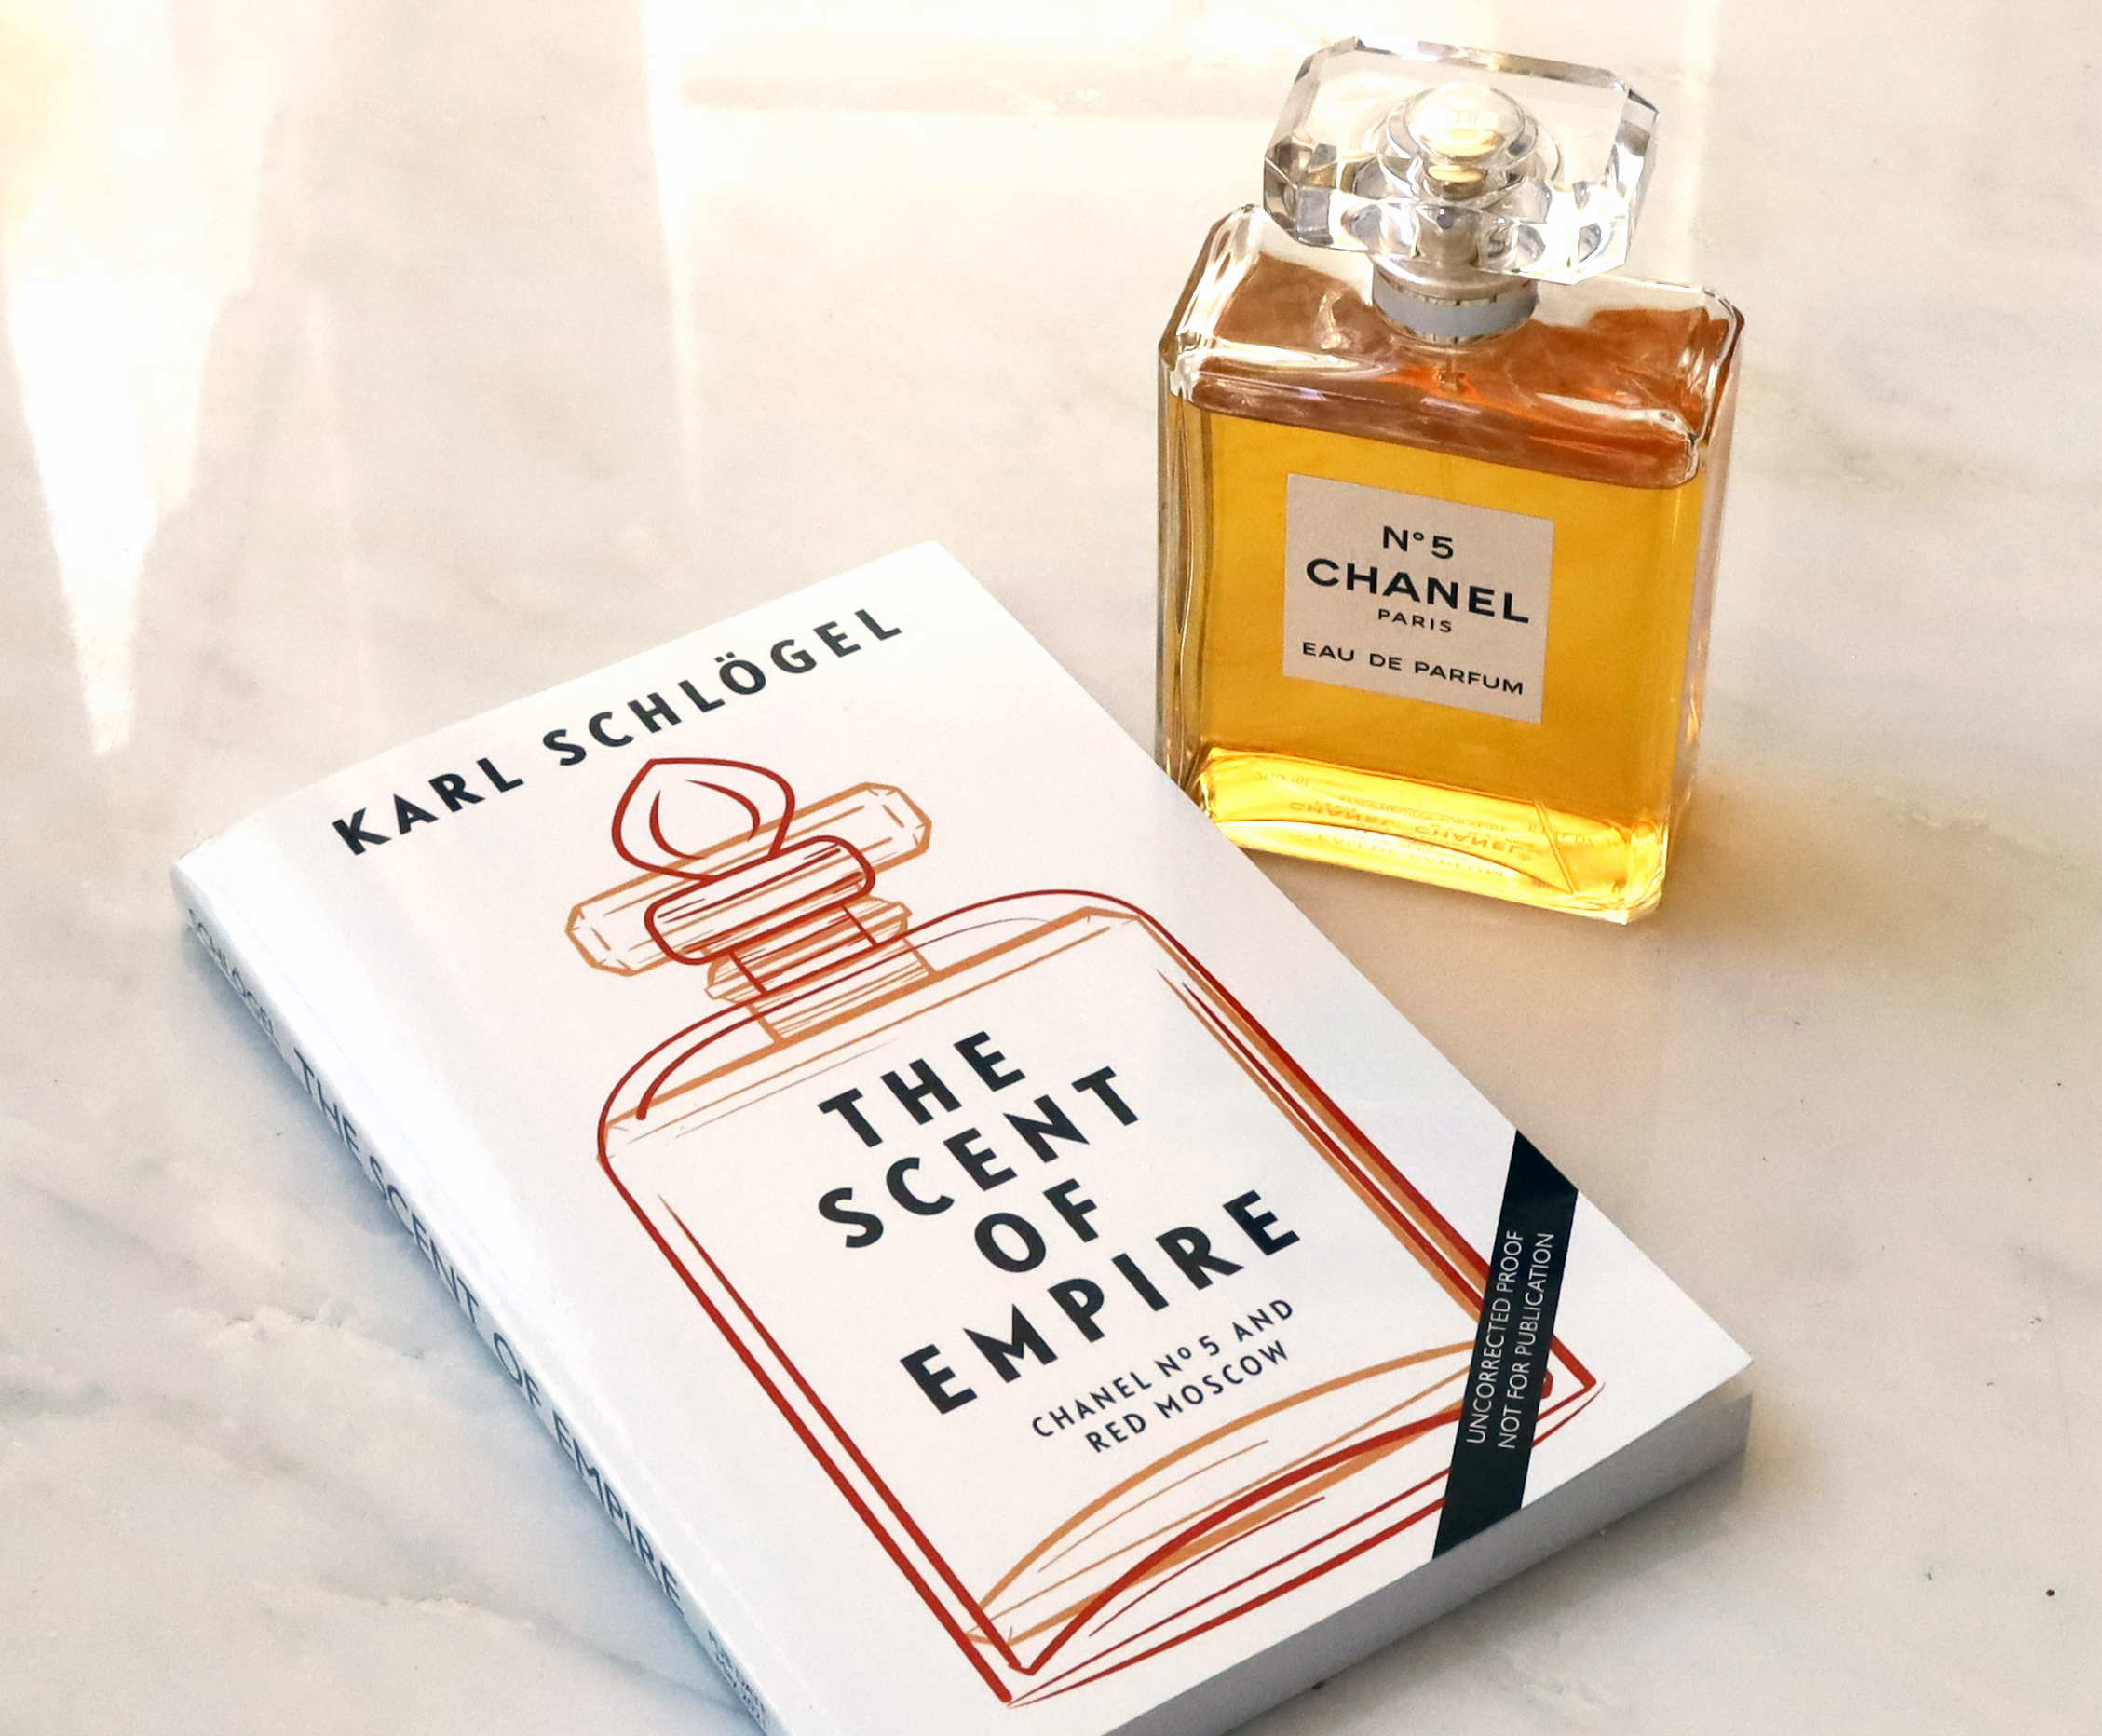 The Scent of Empire: Chanel No. 5 and Red Moscow Book by Karl